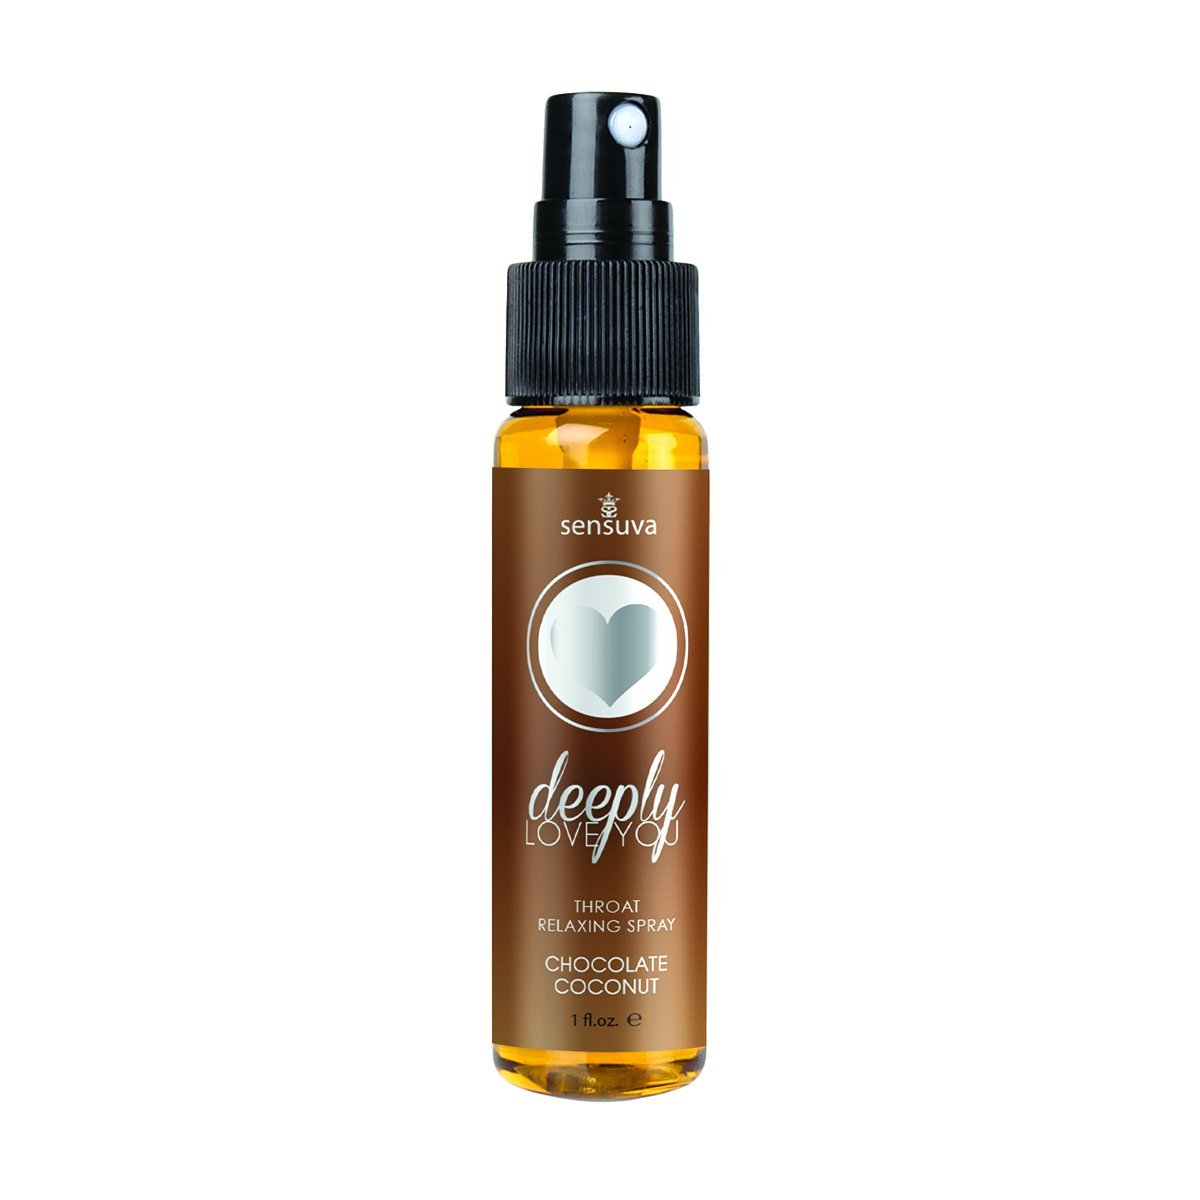 Deeply Love You Chocolate Coconut Throat Relaxing Spray 1 Oz Intimates Adult Boutique